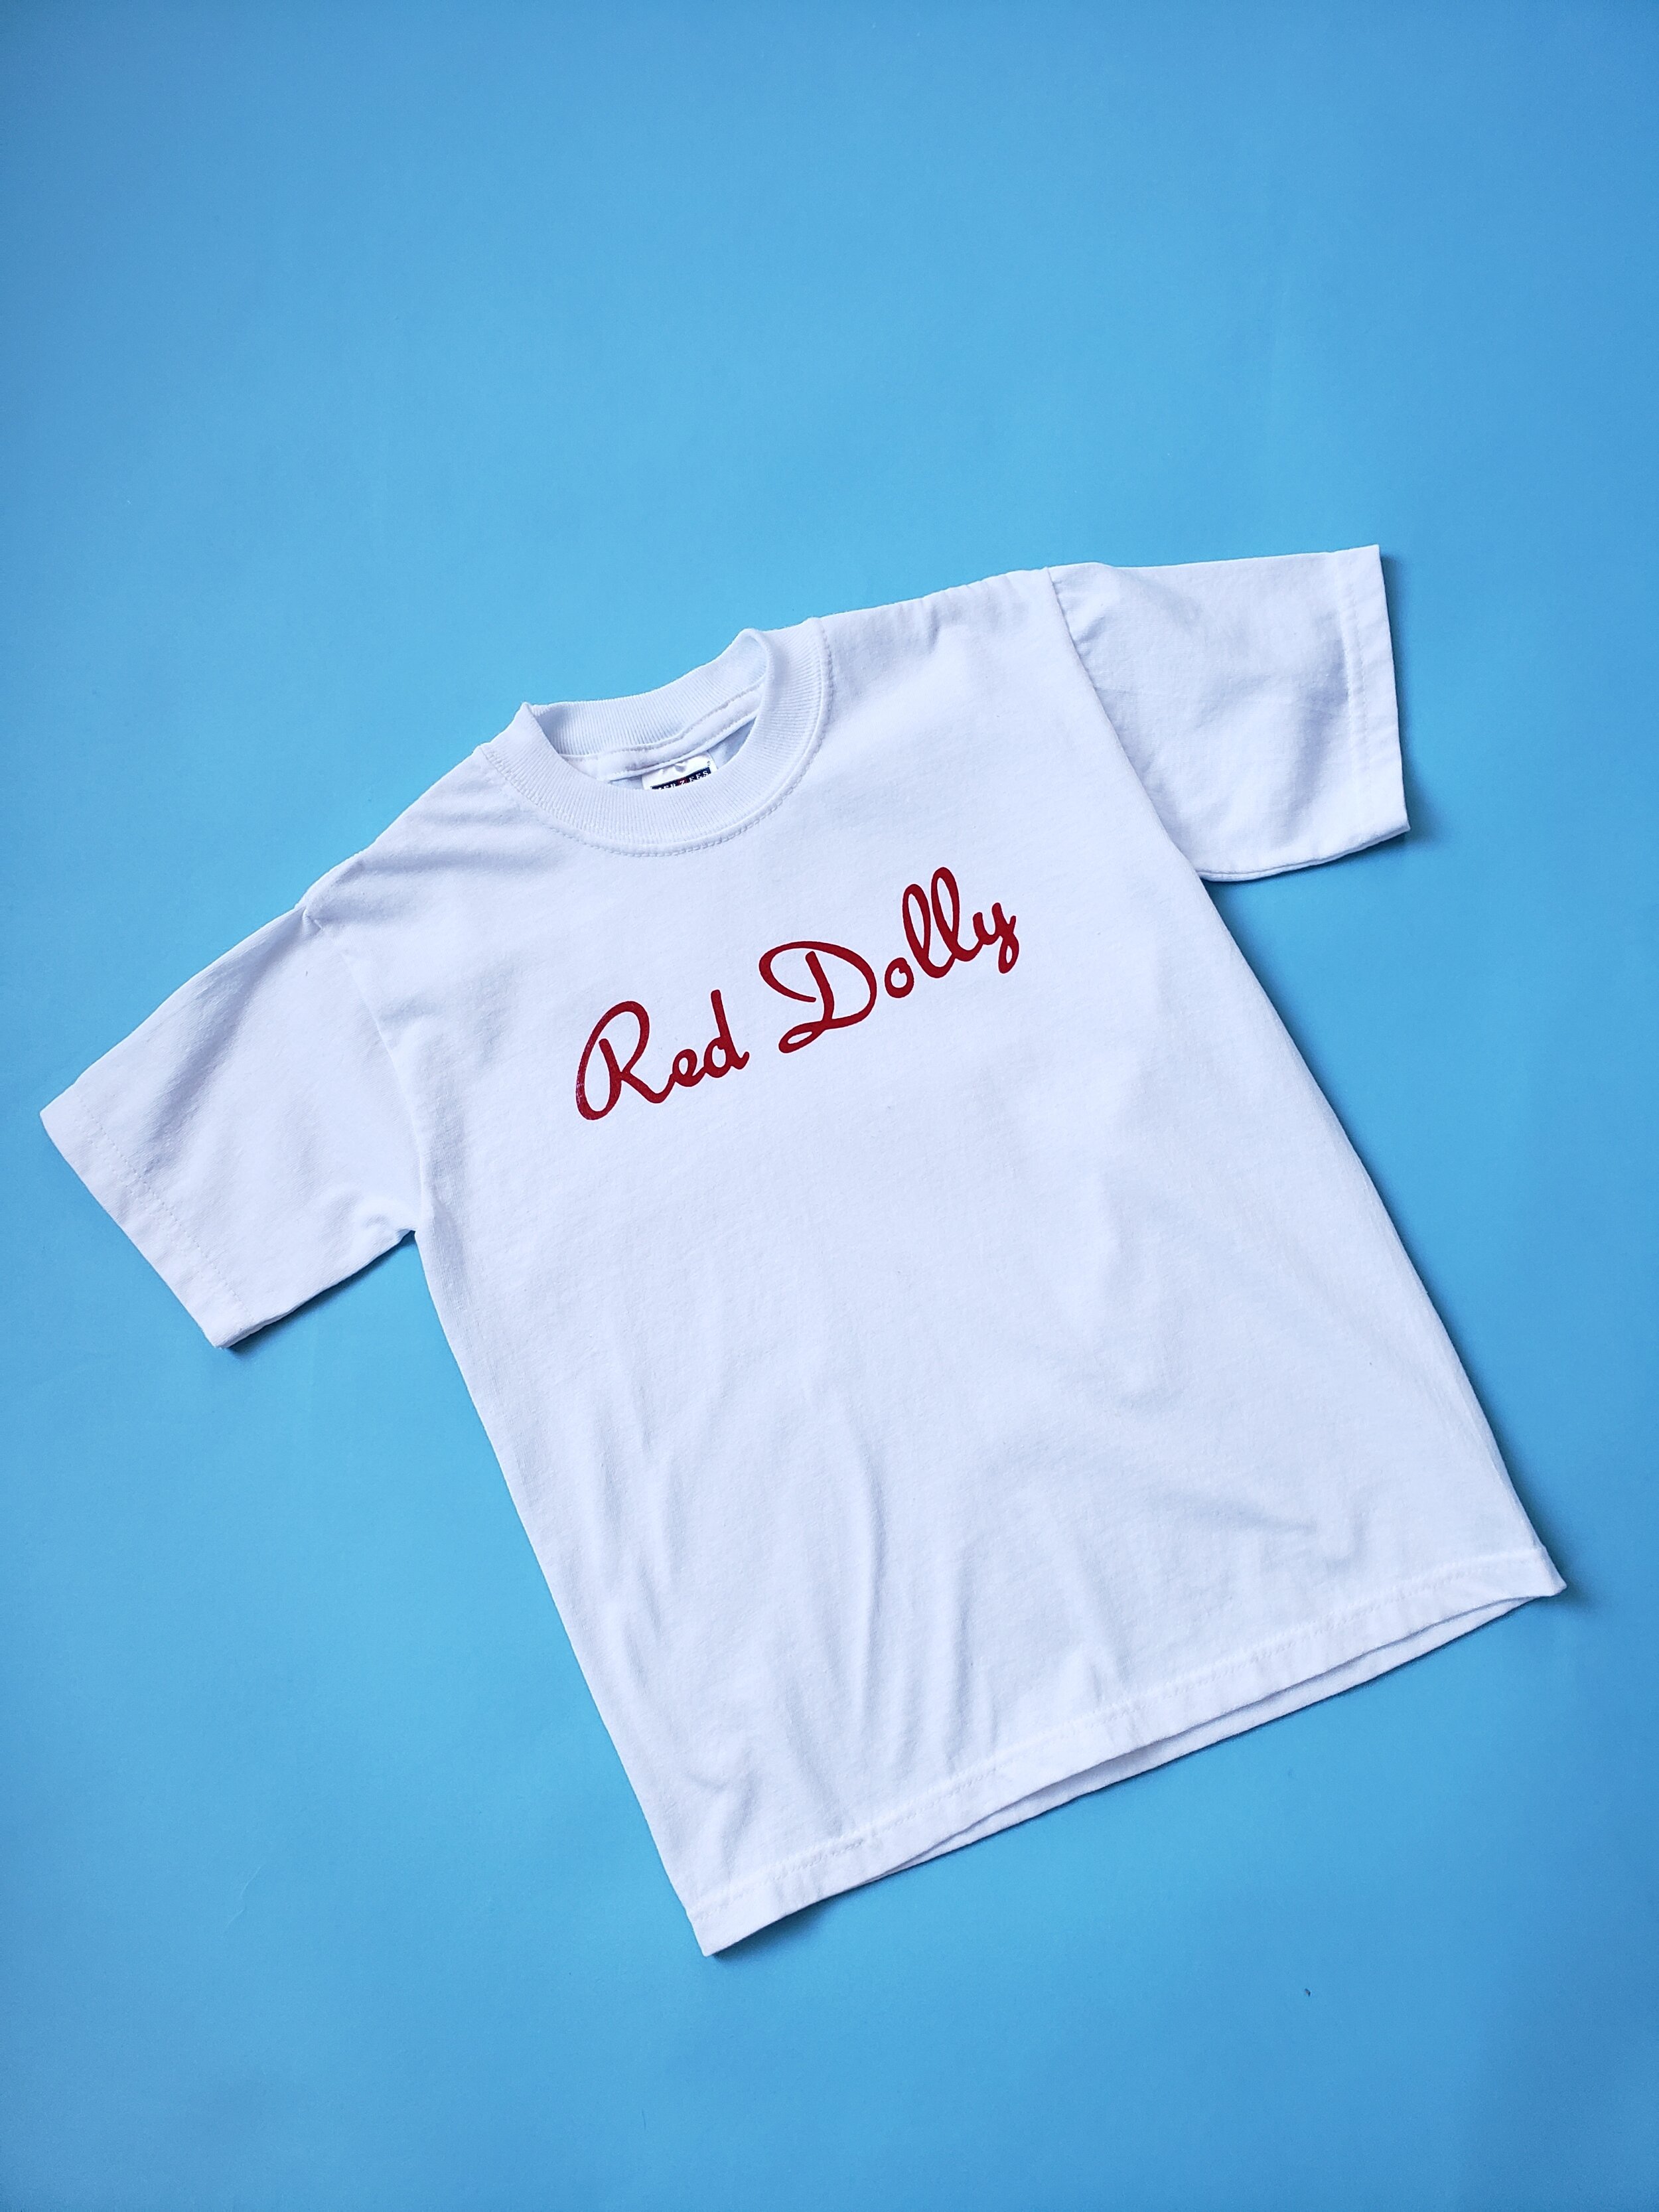 Red Dolly logo T shirt — Red Dolly Swimwear